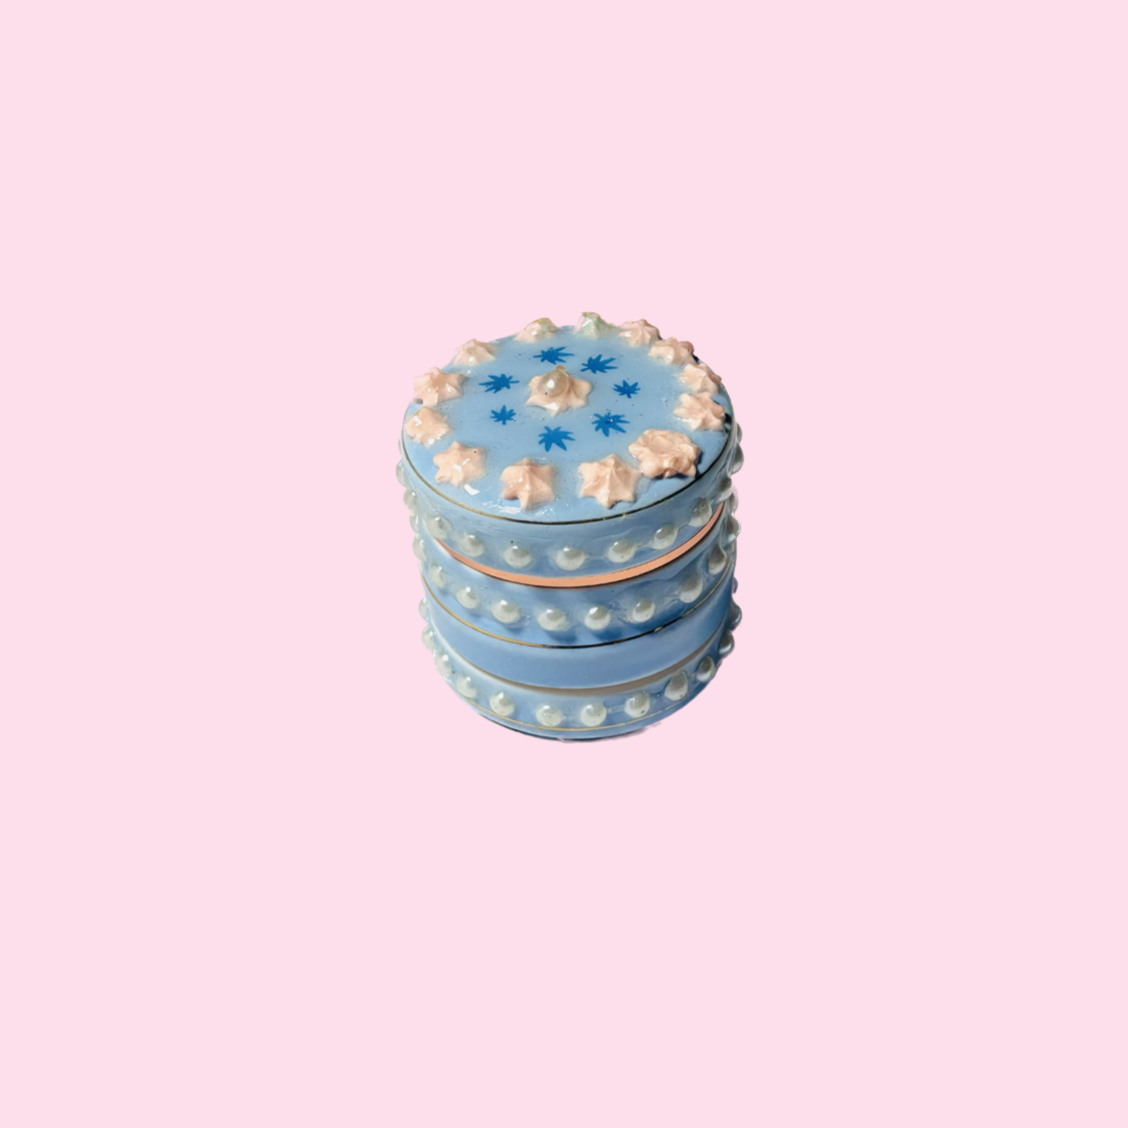 Candy Clouds- Handmade Fake Cake 5 Piece Blue Porcelain Grinder with sprinkles and pearls